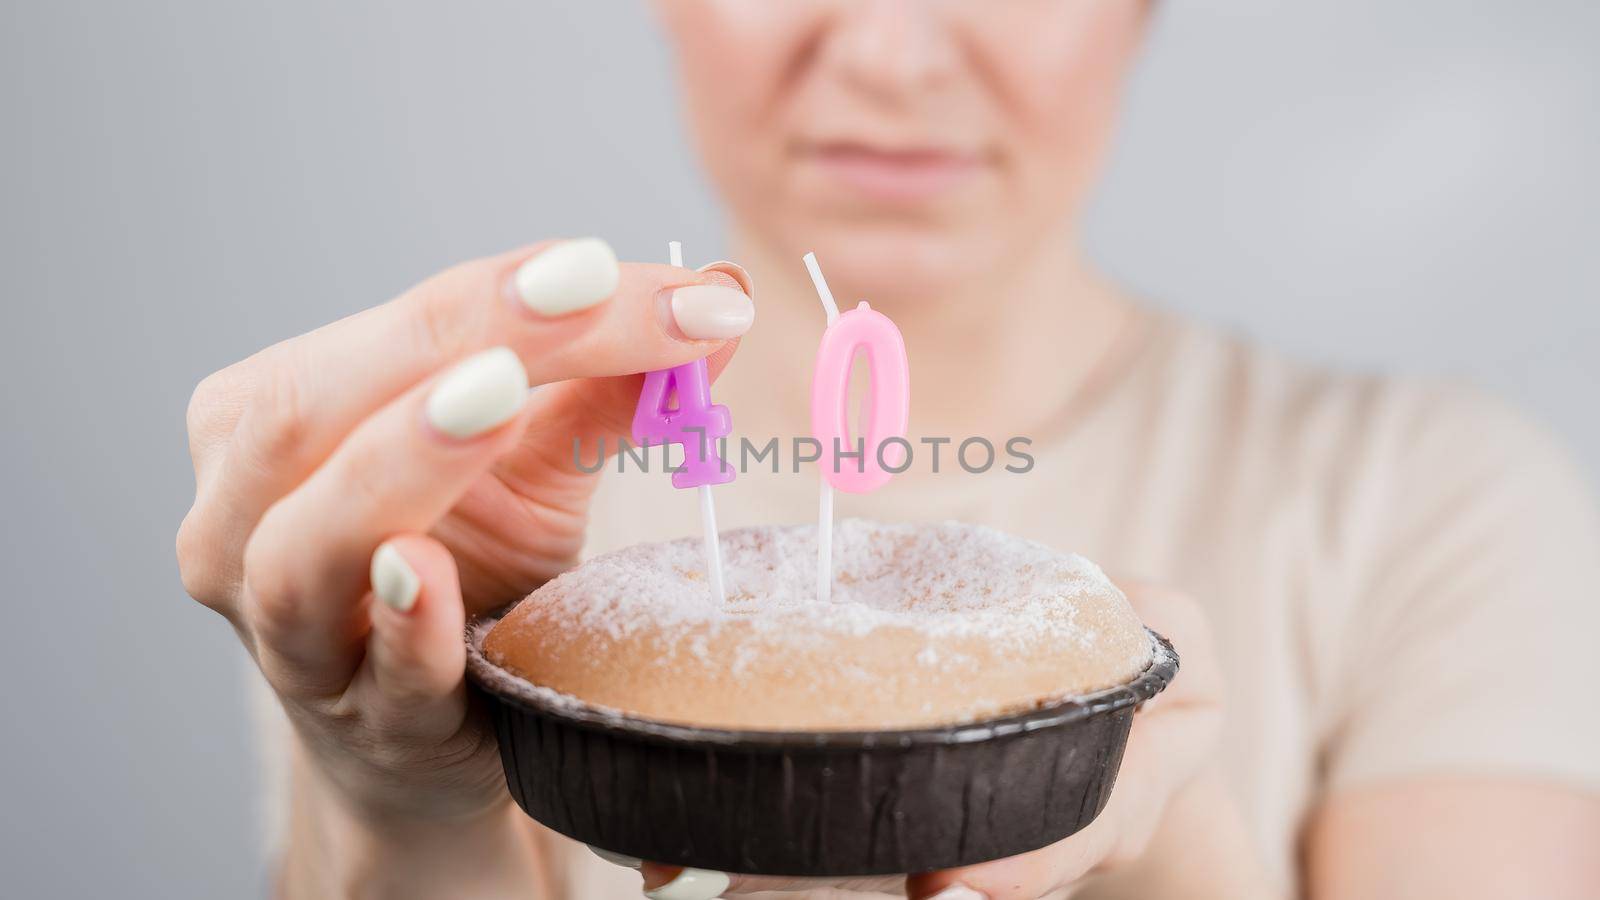 Unhappy woman holding a cake with candles for her 40th birthday. The girl cries about the loss of youth